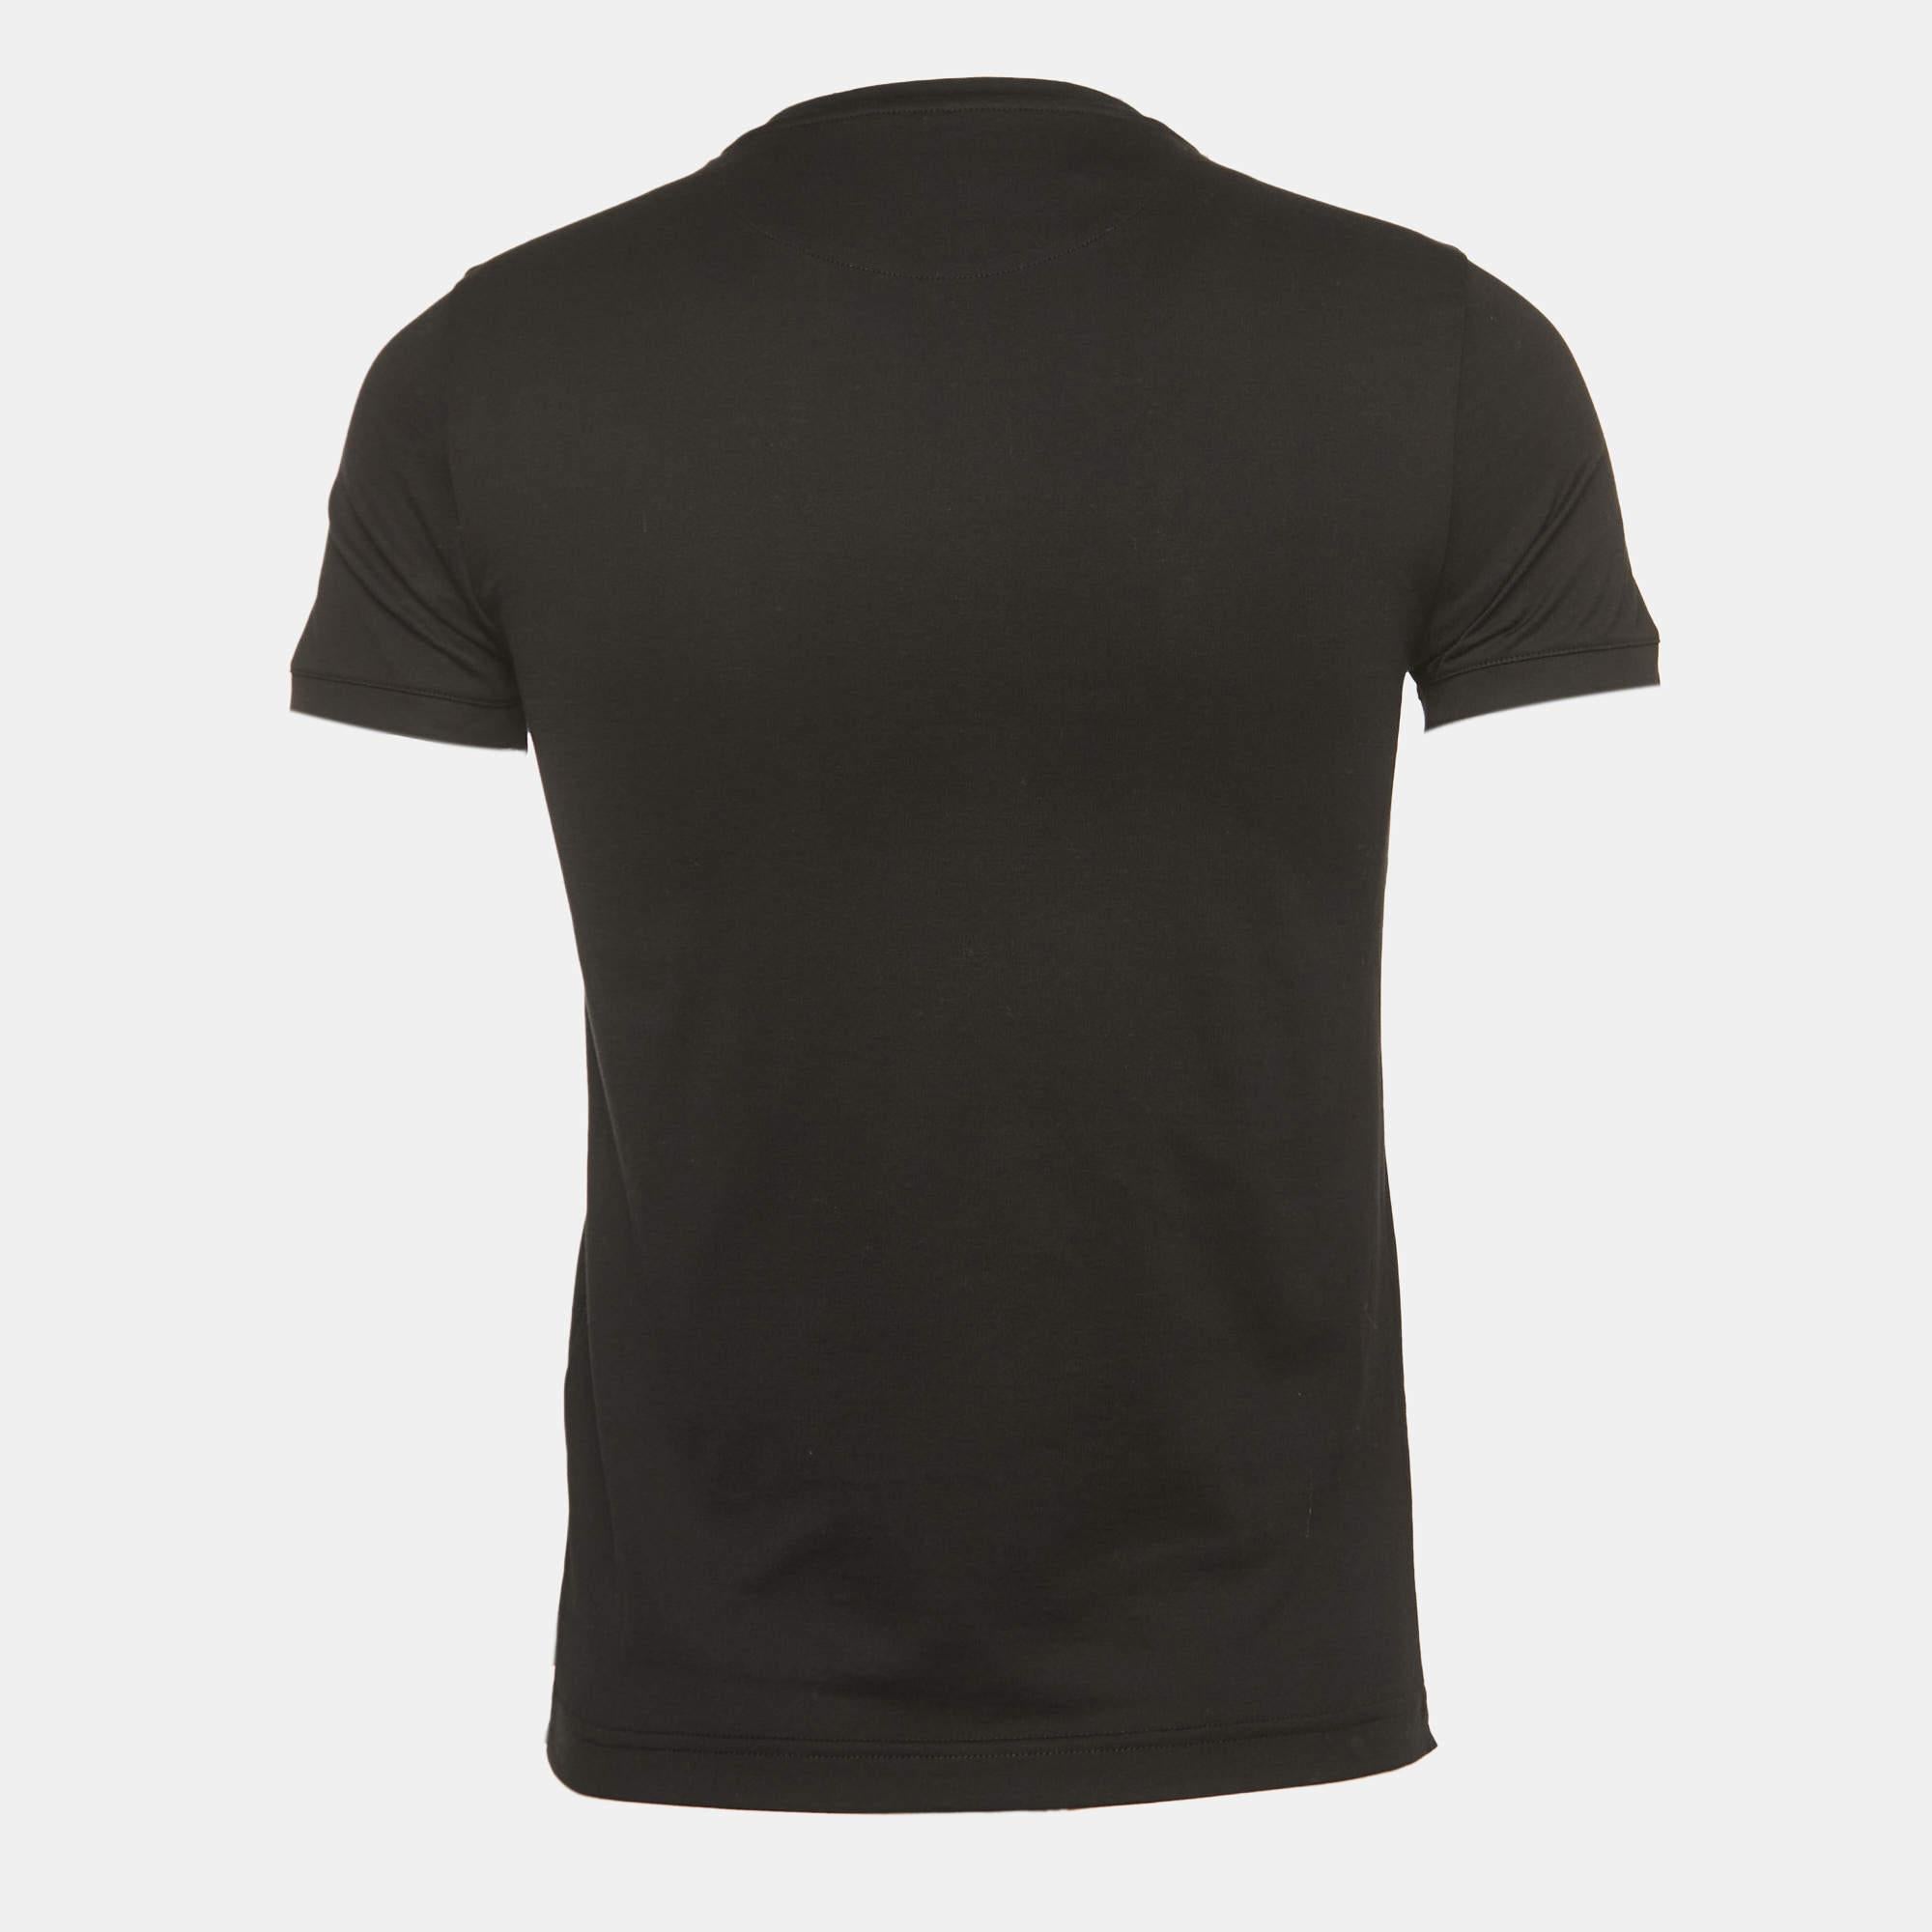 Choose all-day comfort with this Fendi T-shirt. Beautifully made, the black T-shirt, featuring a round neckline and short sleeves, guarantees quality and simple style.

